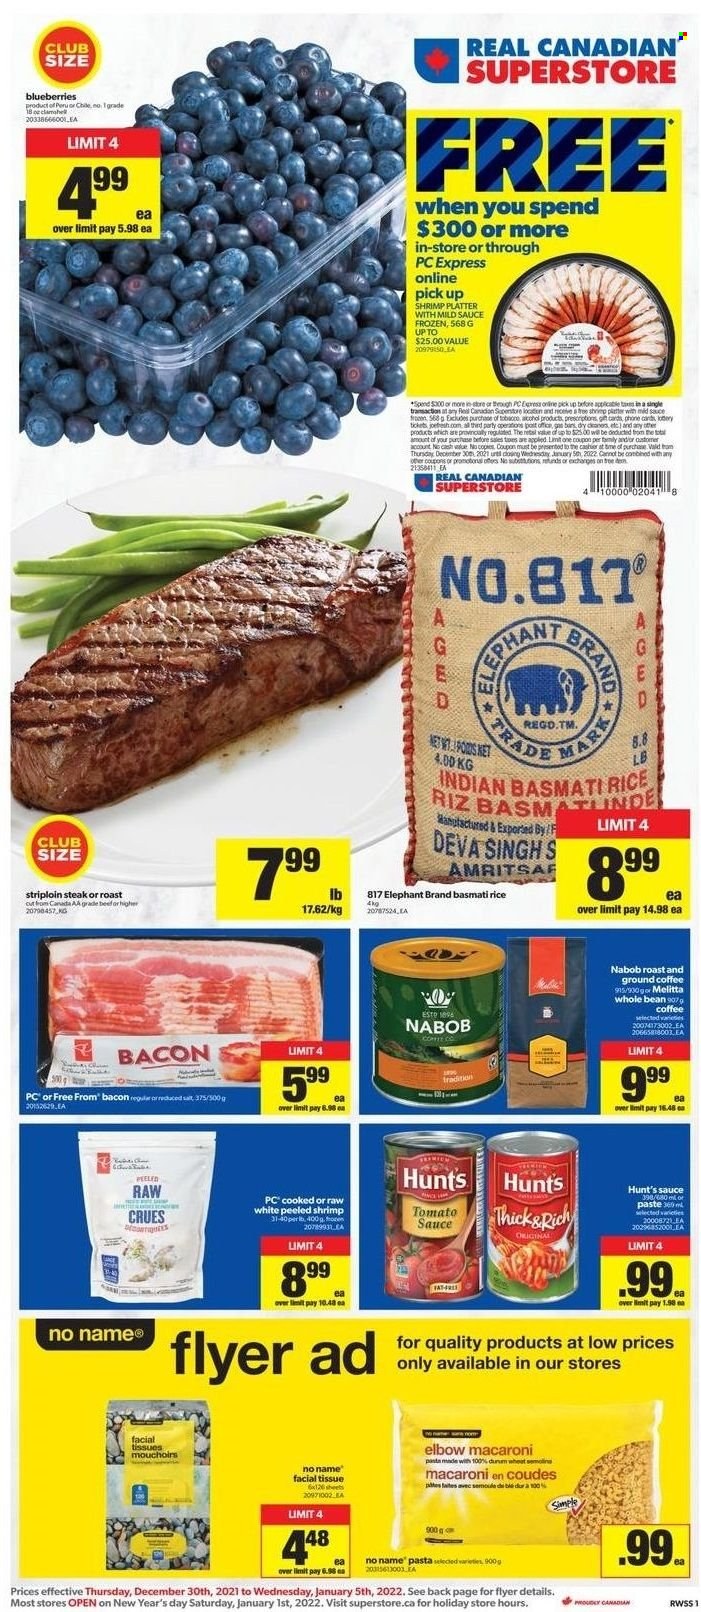 thumbnail - Real Canadian Superstore Flyer - December 30, 2021 - January 05, 2022 - Sales products - blueberries, No Name, macaroni, pasta, sauce, bacon, tomato sauce, basmati rice, rice, coffee, ground coffee, beef meat, striploin steak, tissues, facial tissues, phone, steak. Page 1.